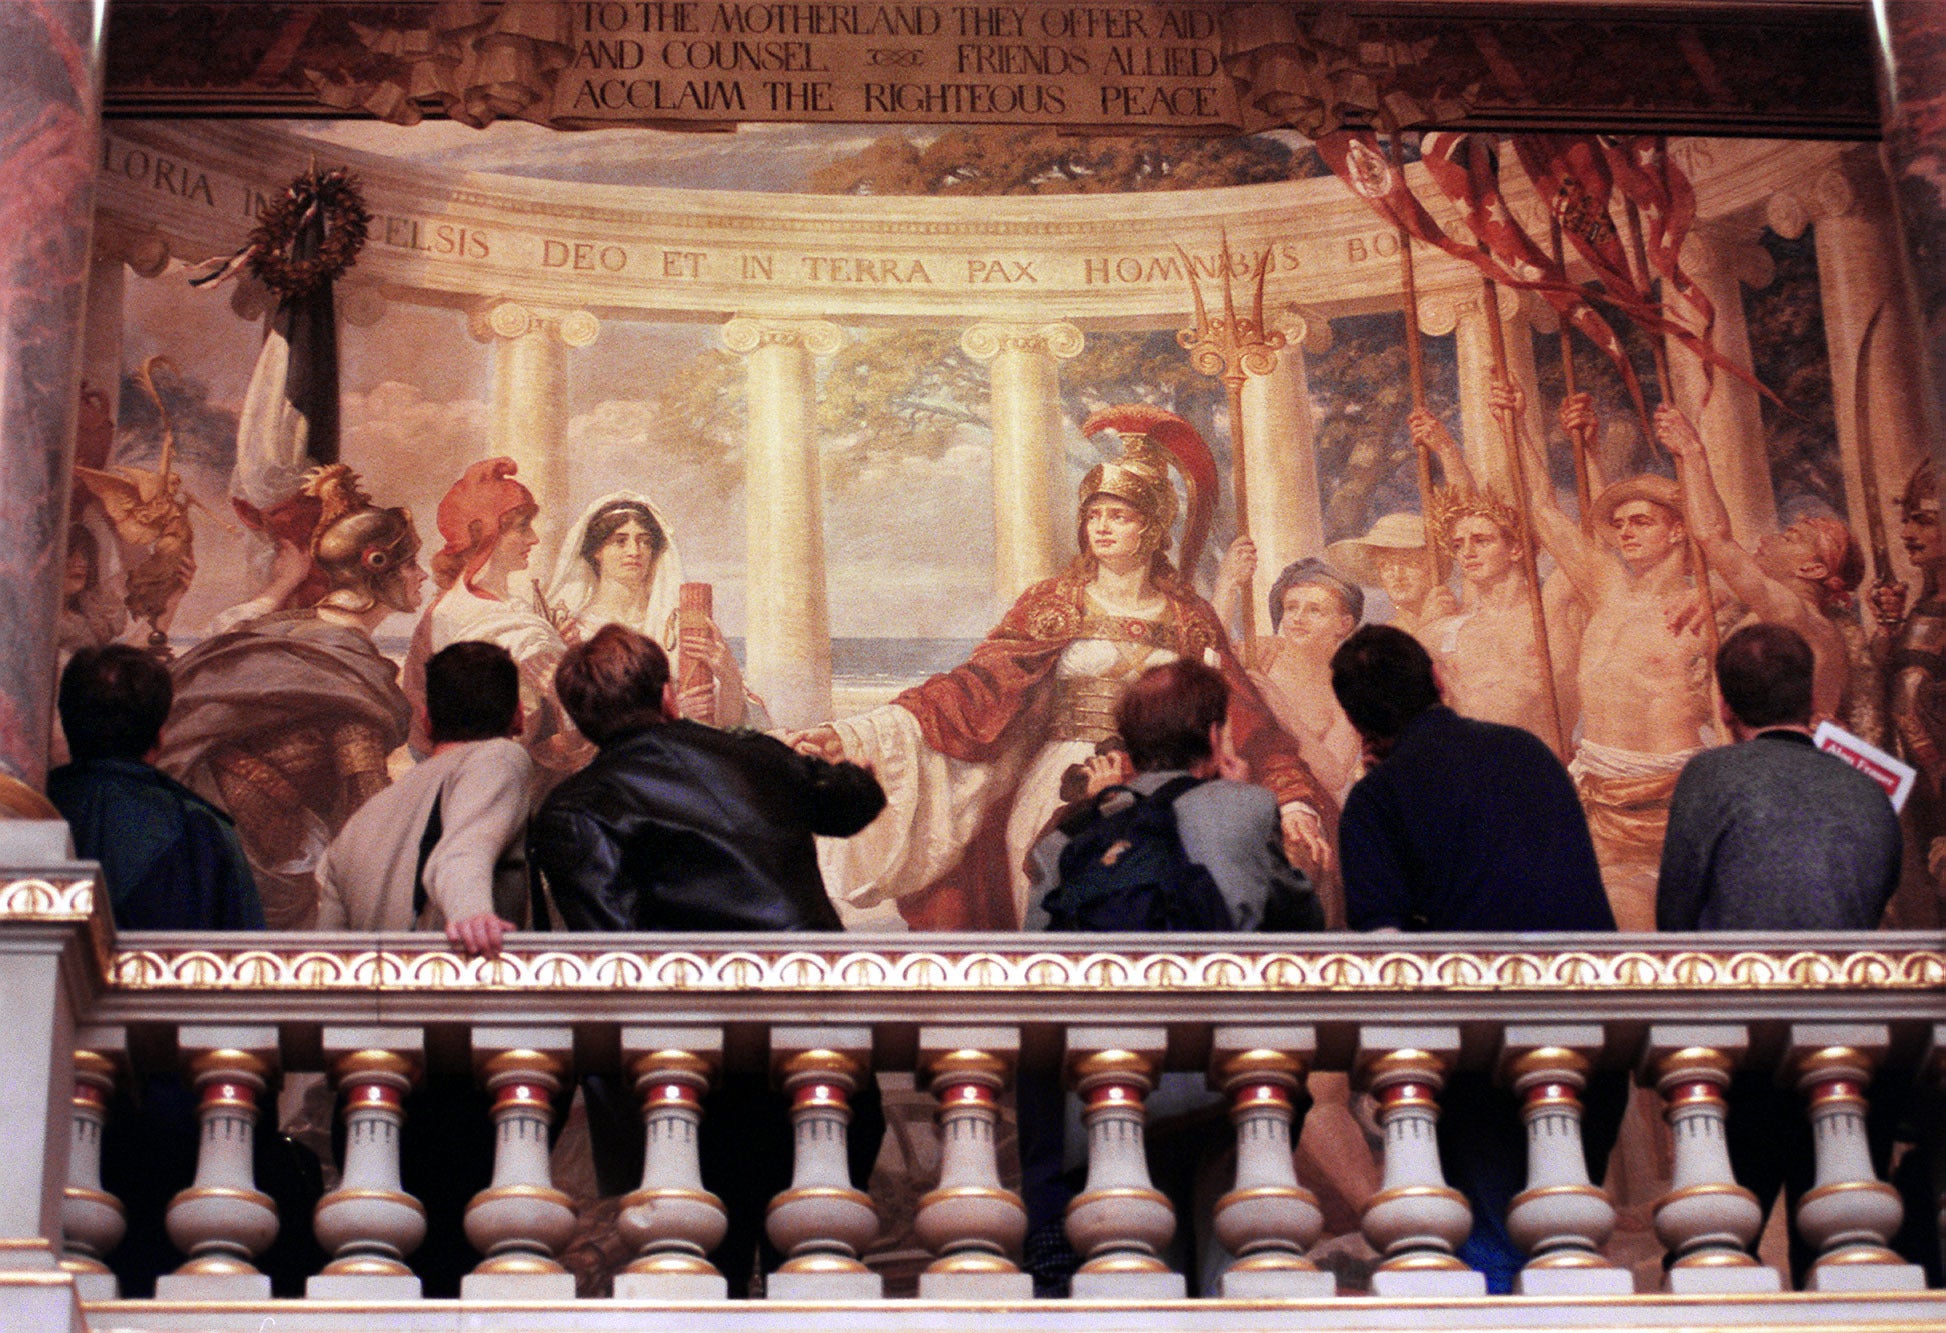 Grand designs: murals on display in the Whitehall institution